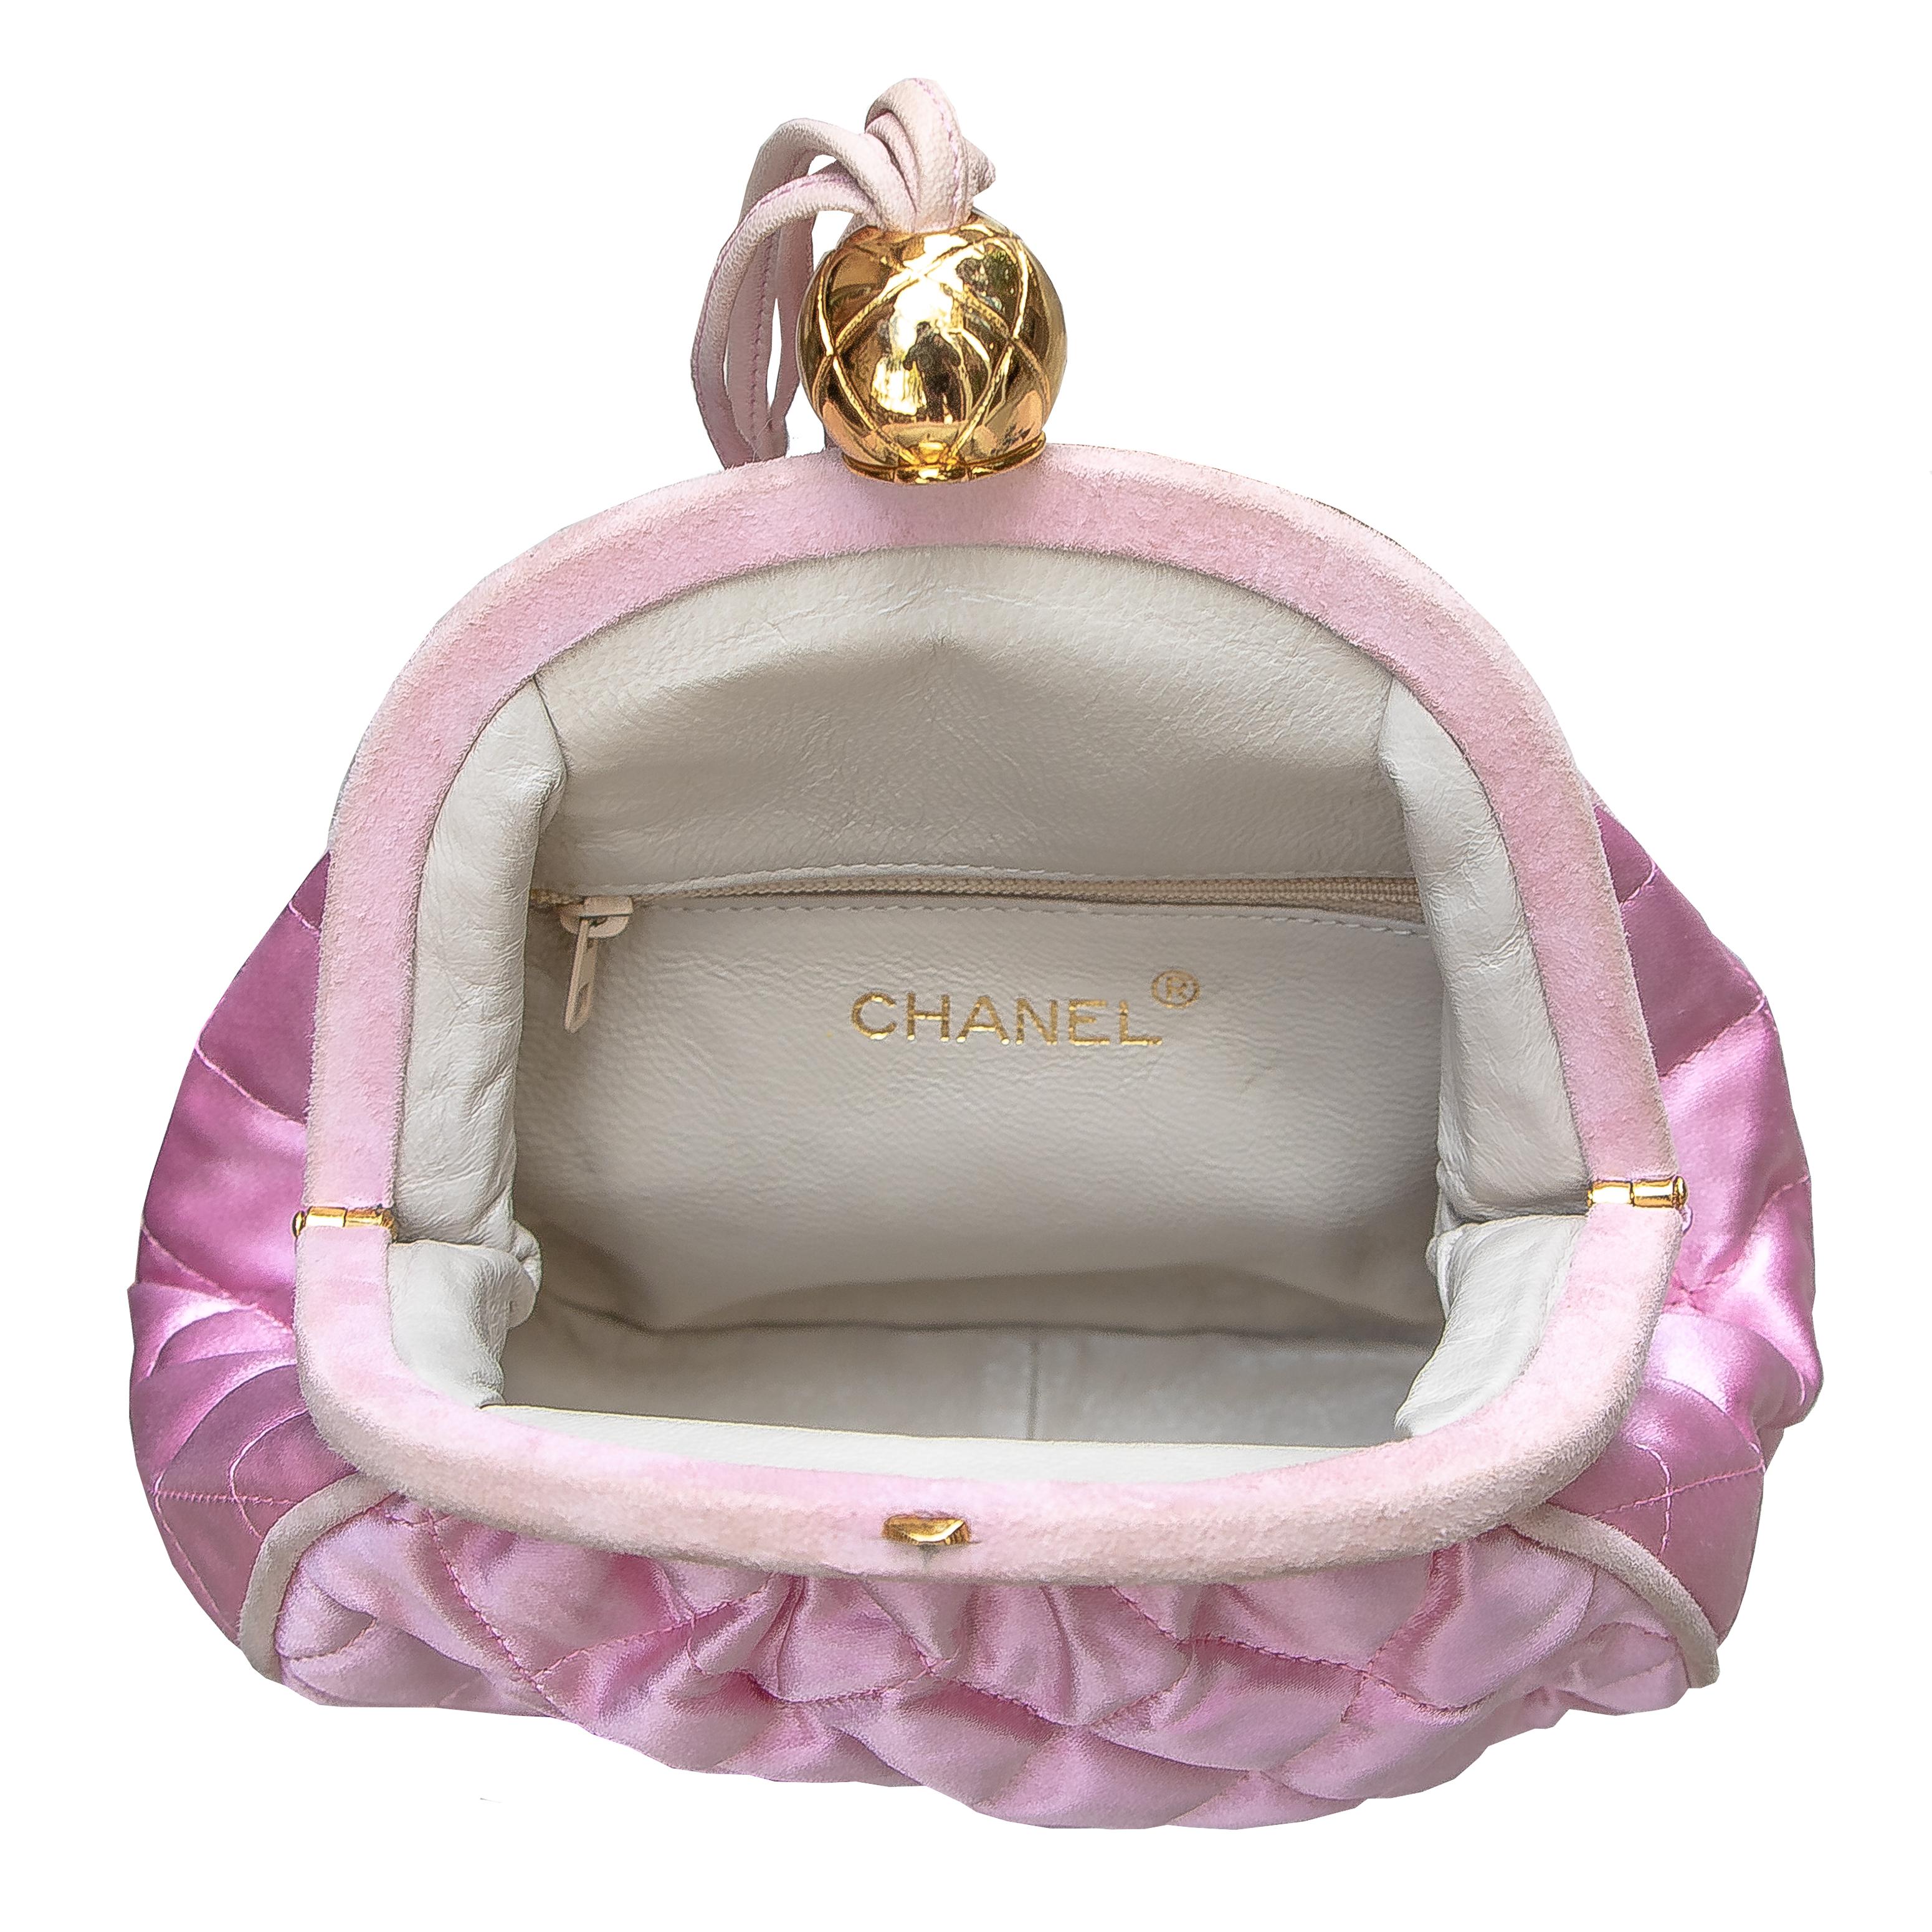 Vintage Chanel handbag yellow gold color hardware. Silk and suede like materiel, with leather straps. One main pocket with an additional small zippered section. Signed Chanel on the bottom, and Made in Italy. Too cute for words. This purse make me